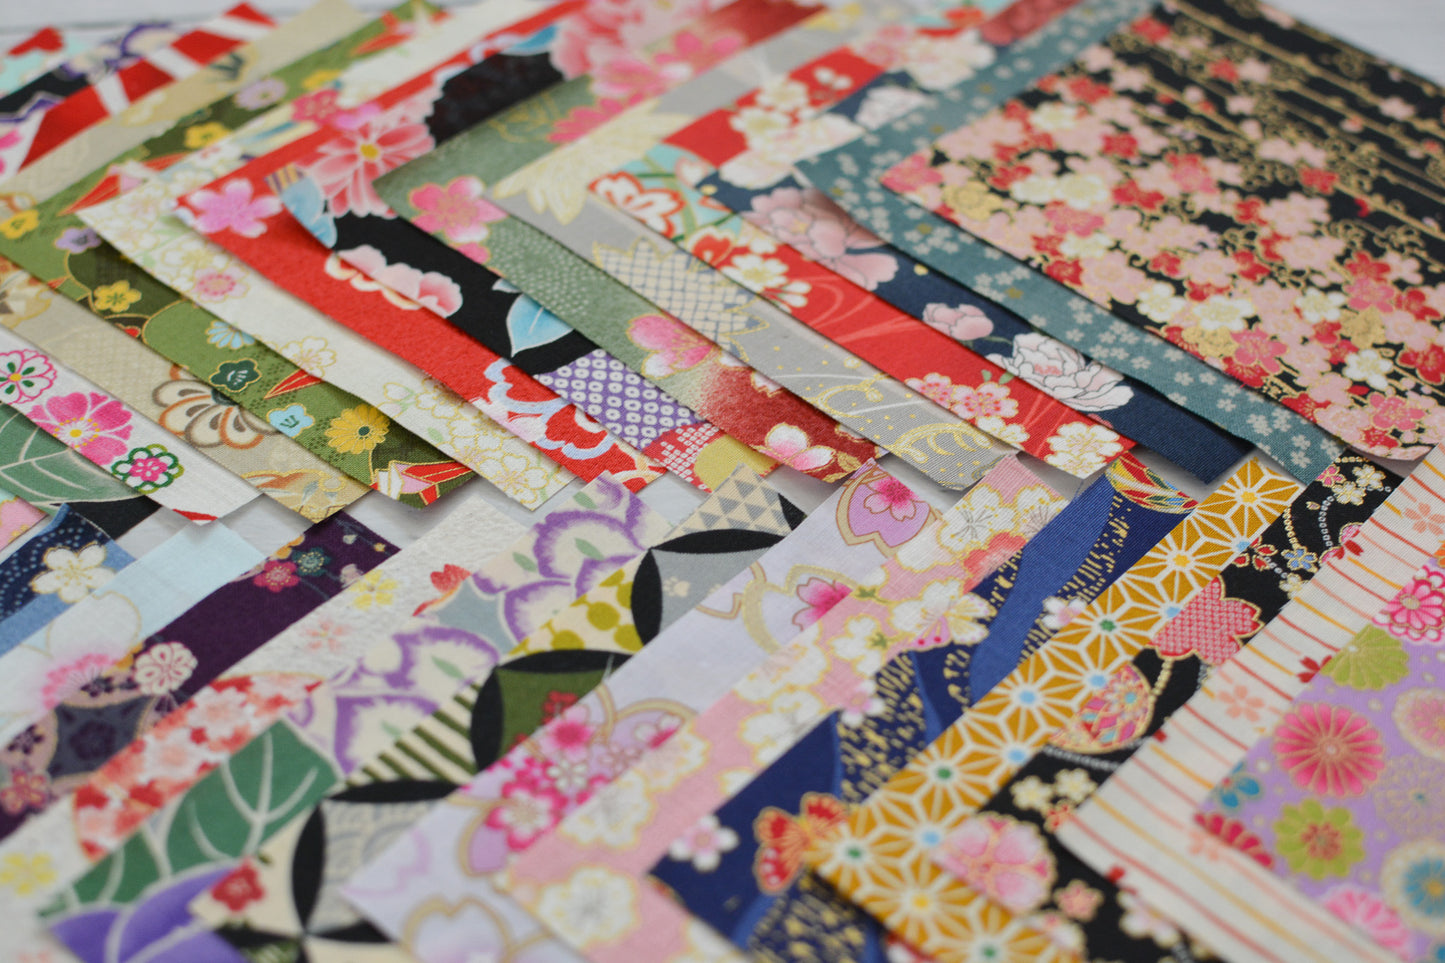 Japanese Fabric Charm Pack 5" x 5" squares - 42 pieces assortment of all different prints